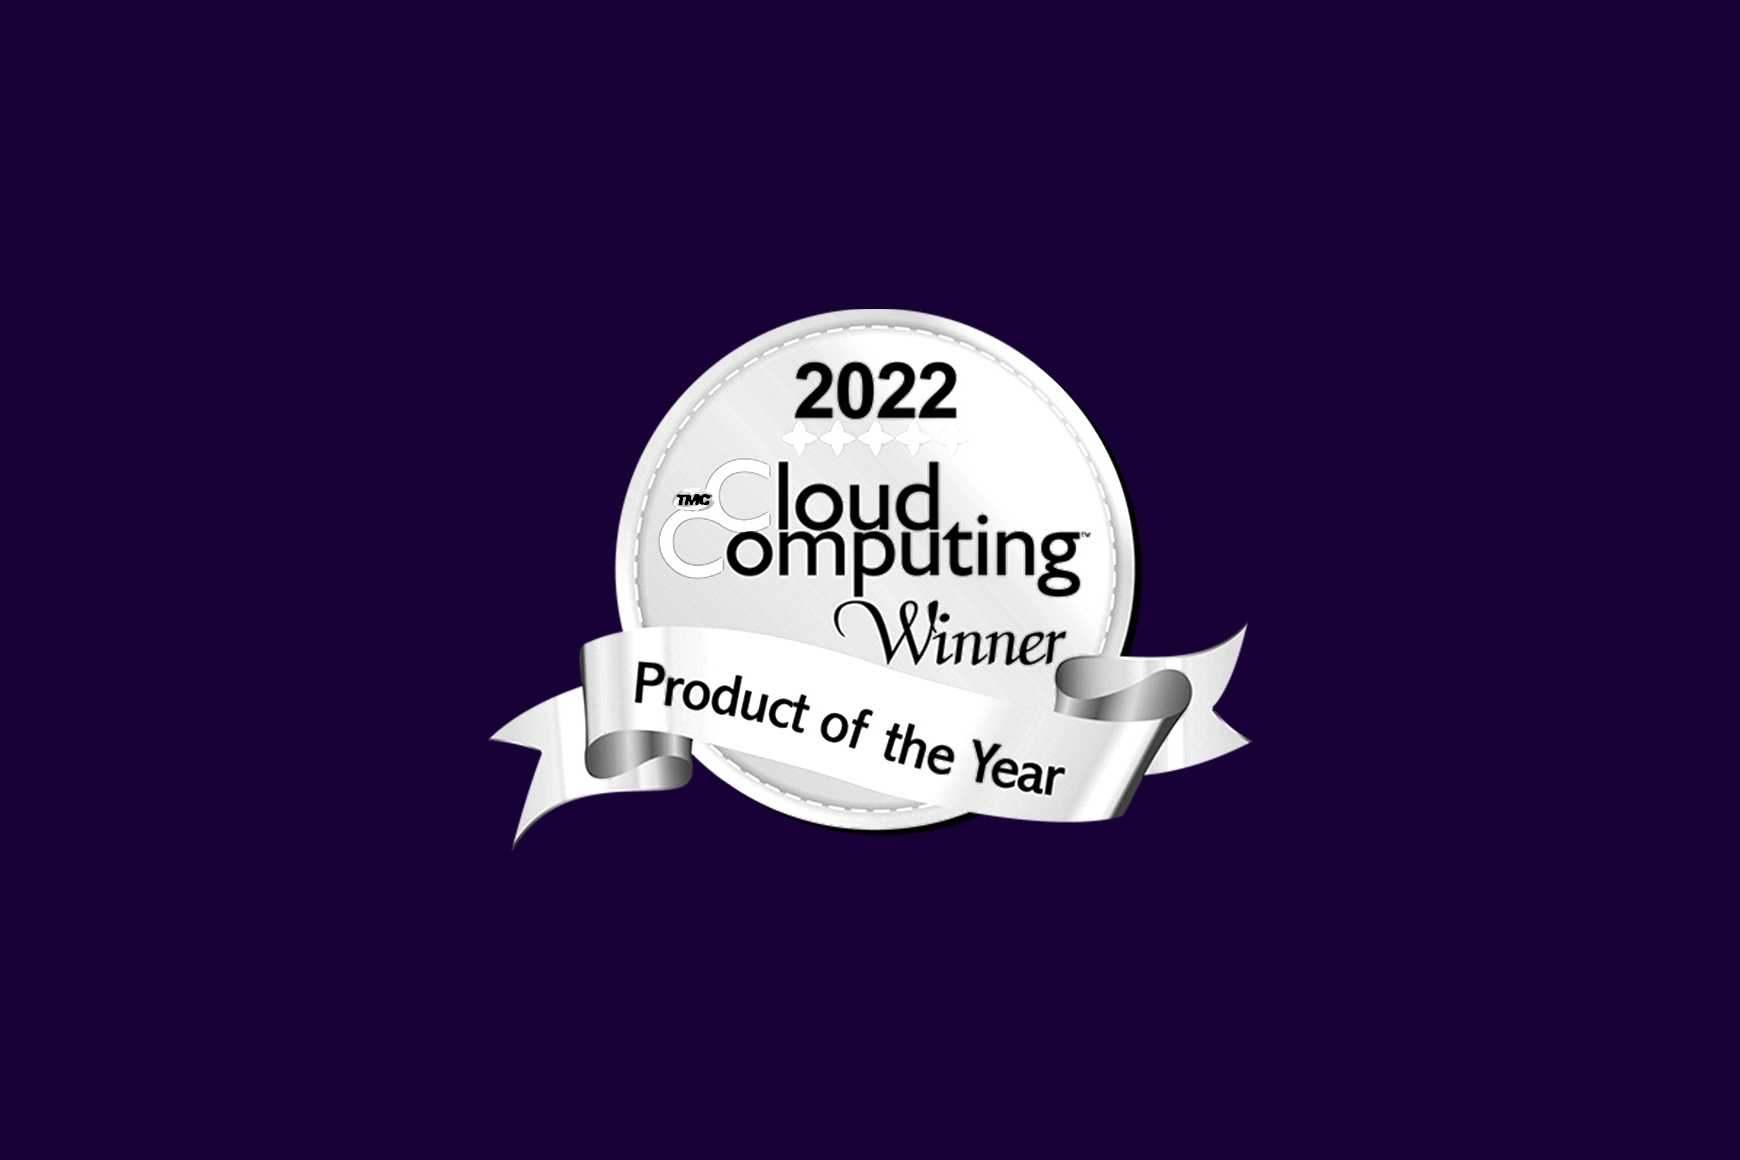 2022 Cloud Computing Product of the Year